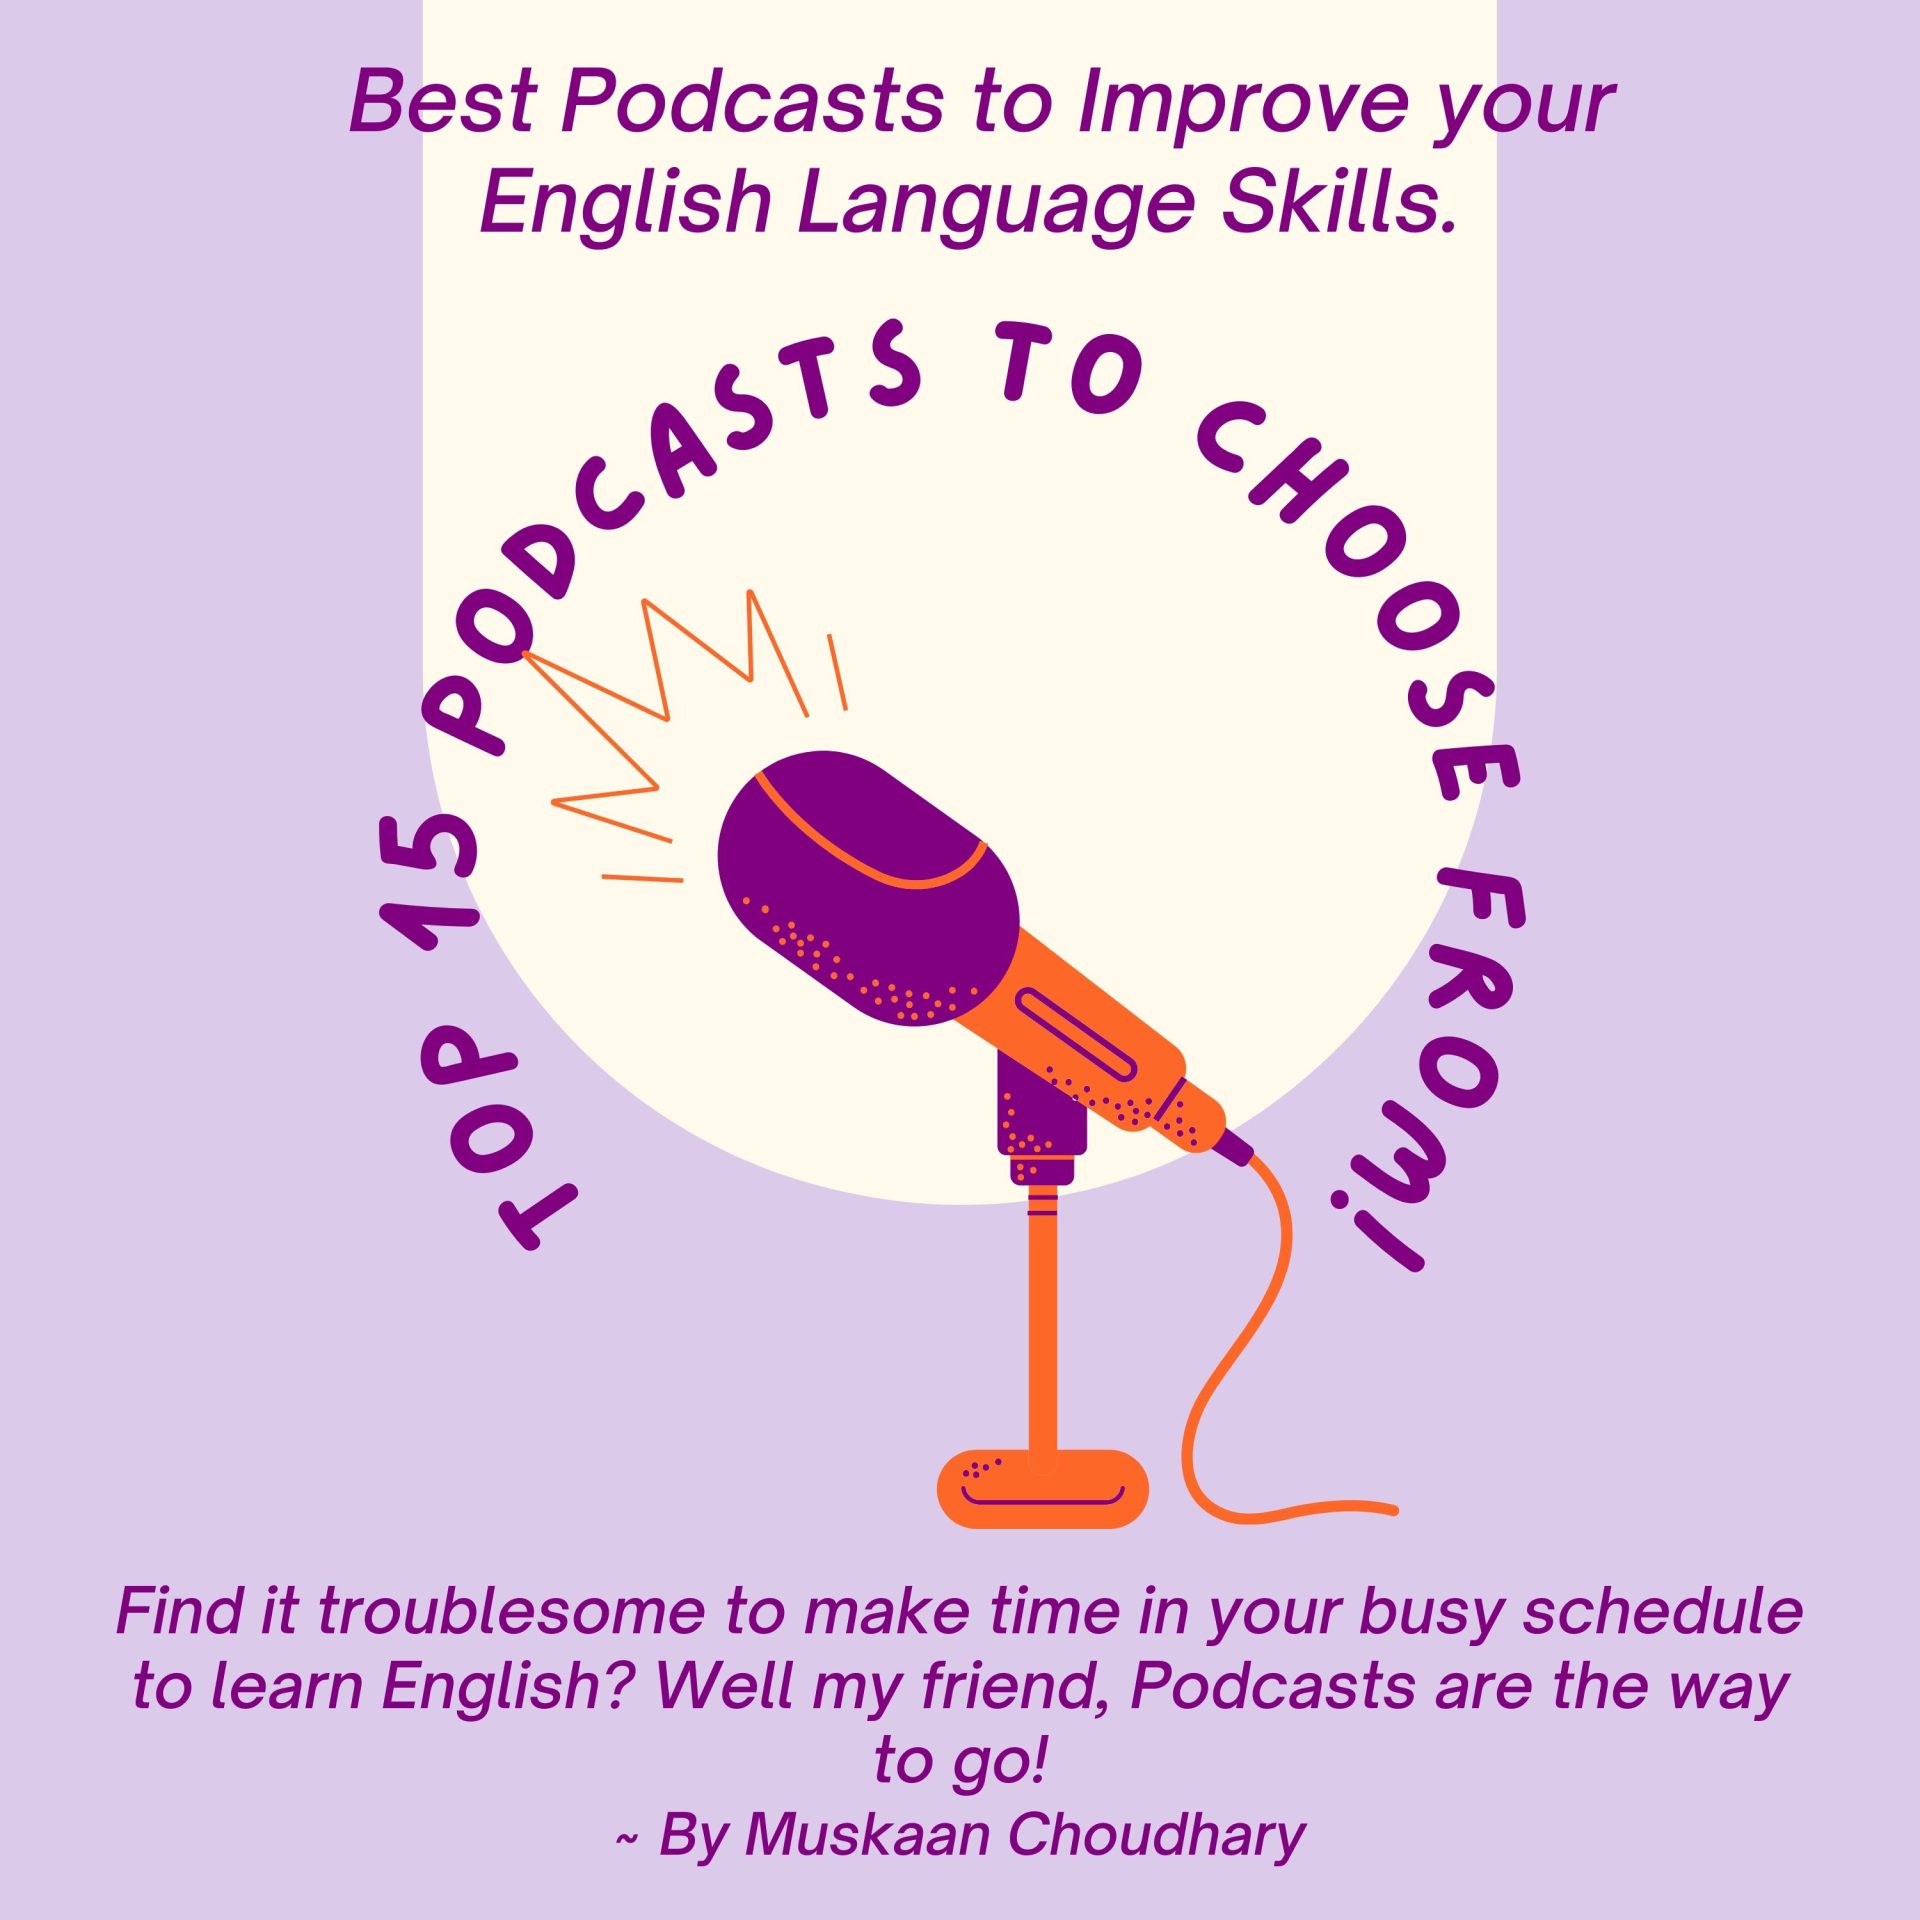 Top 15 Podcasts to improve your English Language Skills